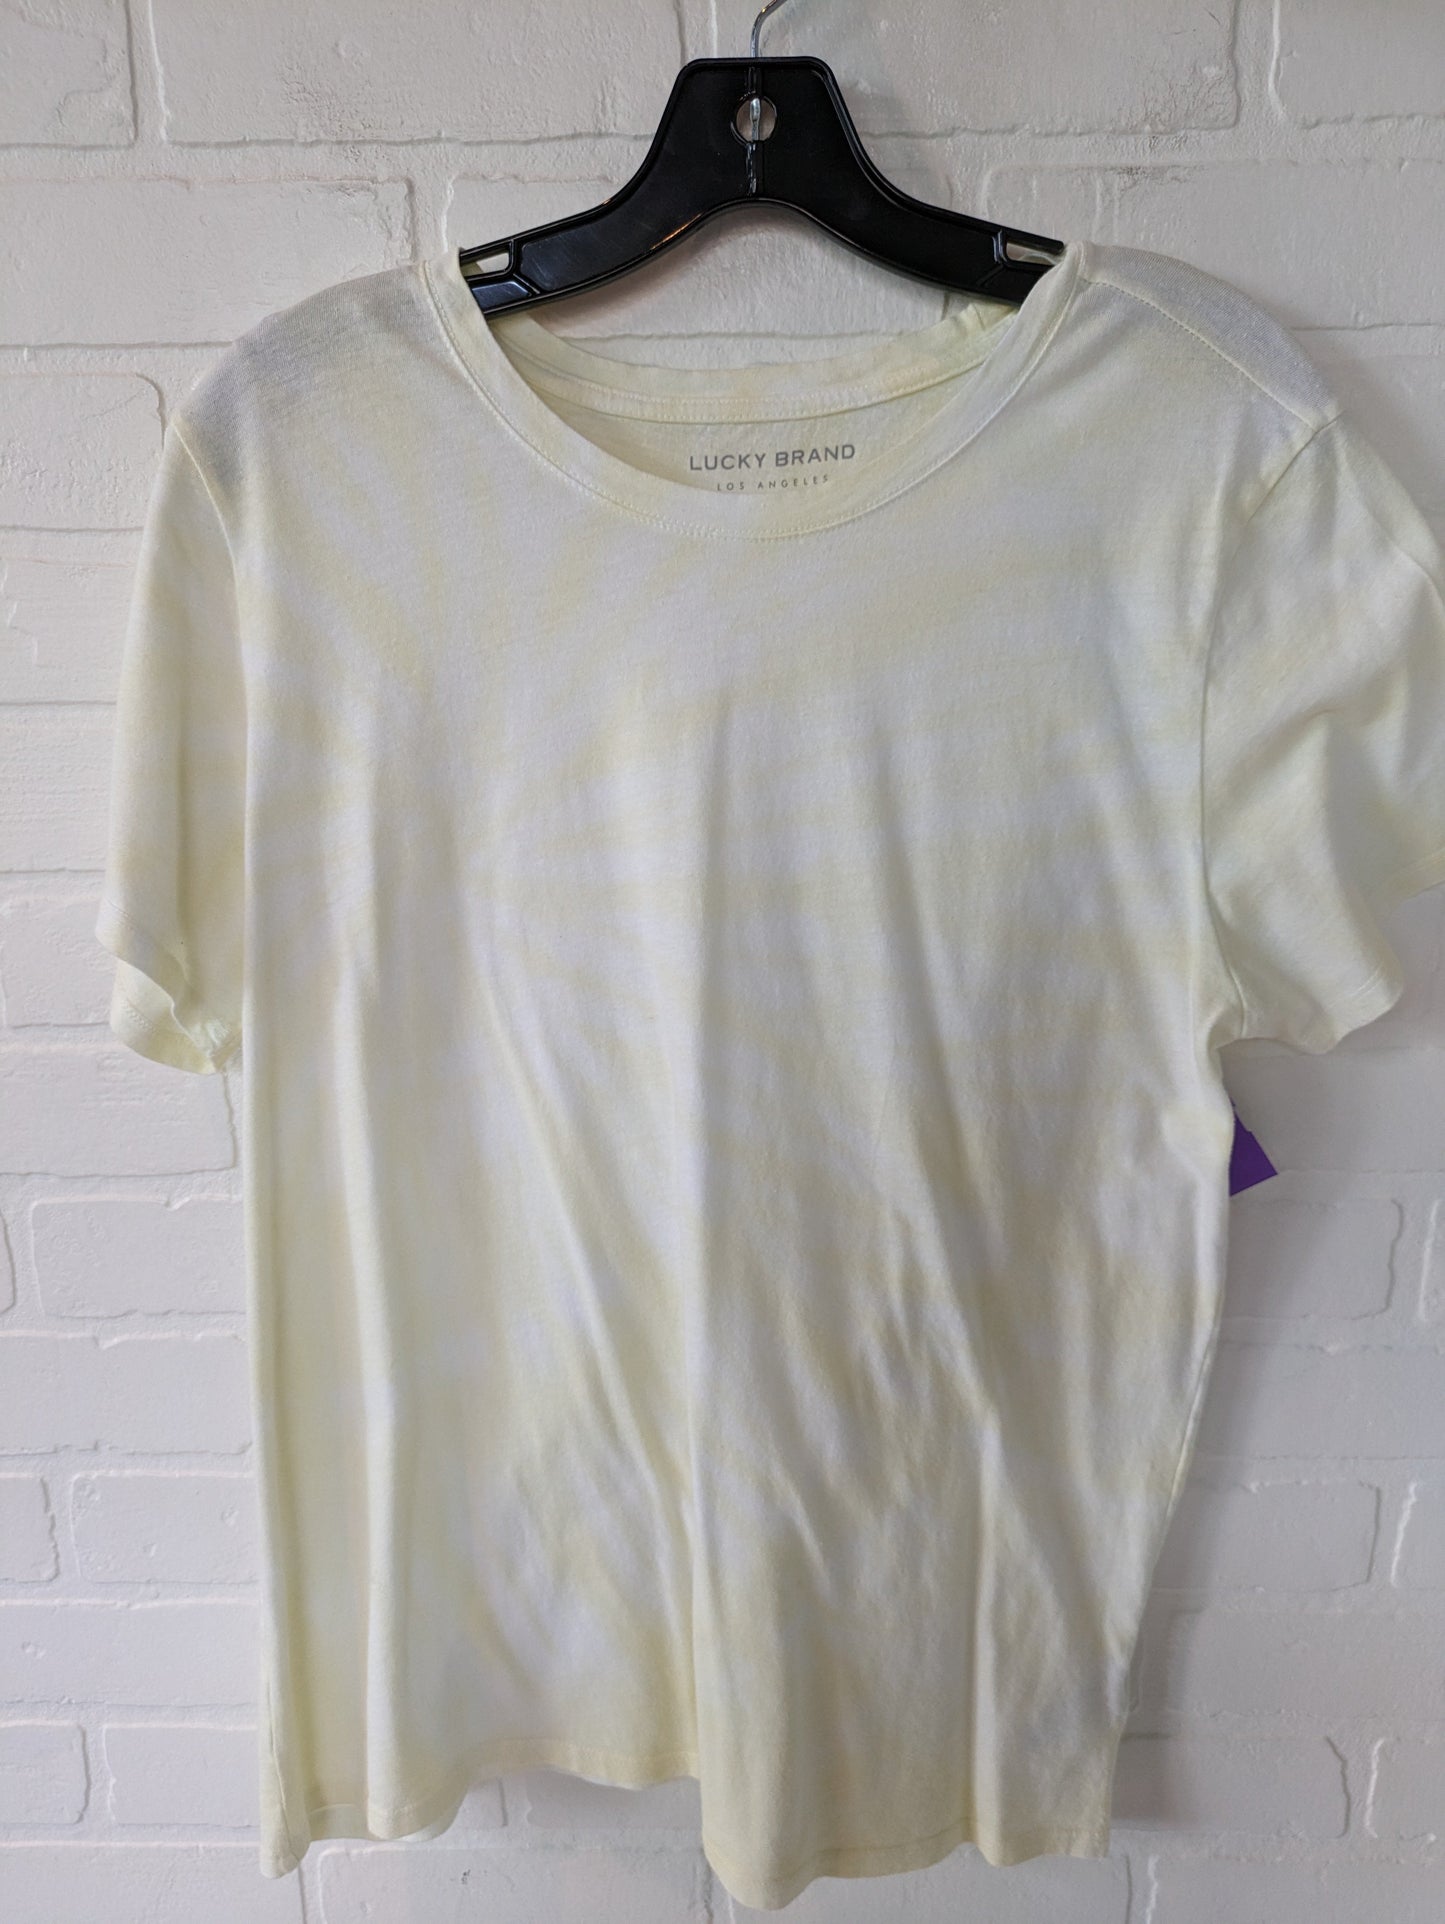 White & Yellow Top Short Sleeve Basic Lucky Brand, Size L